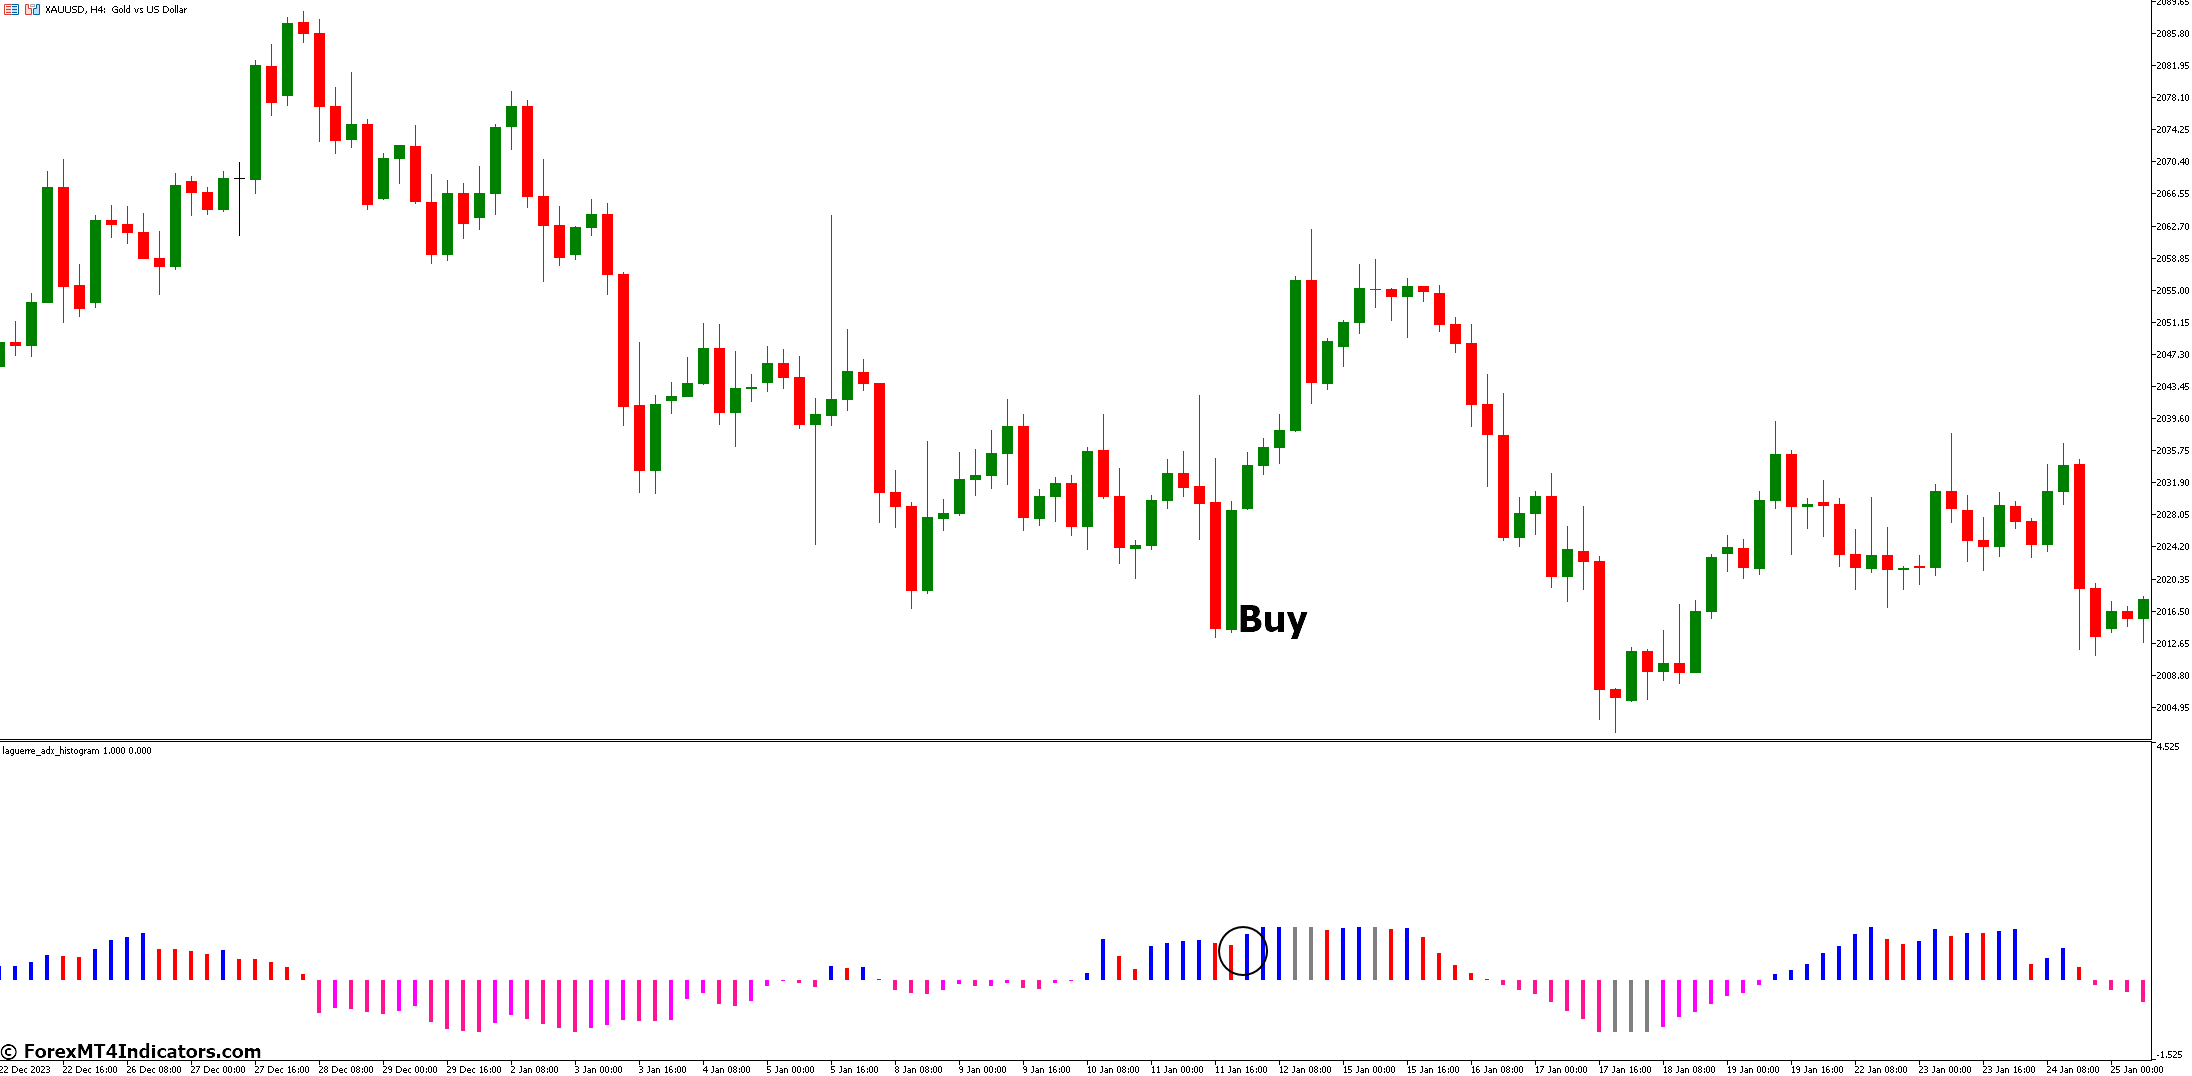 How to Trade with Laguerre ADX Forex Indicator - Buy Entry